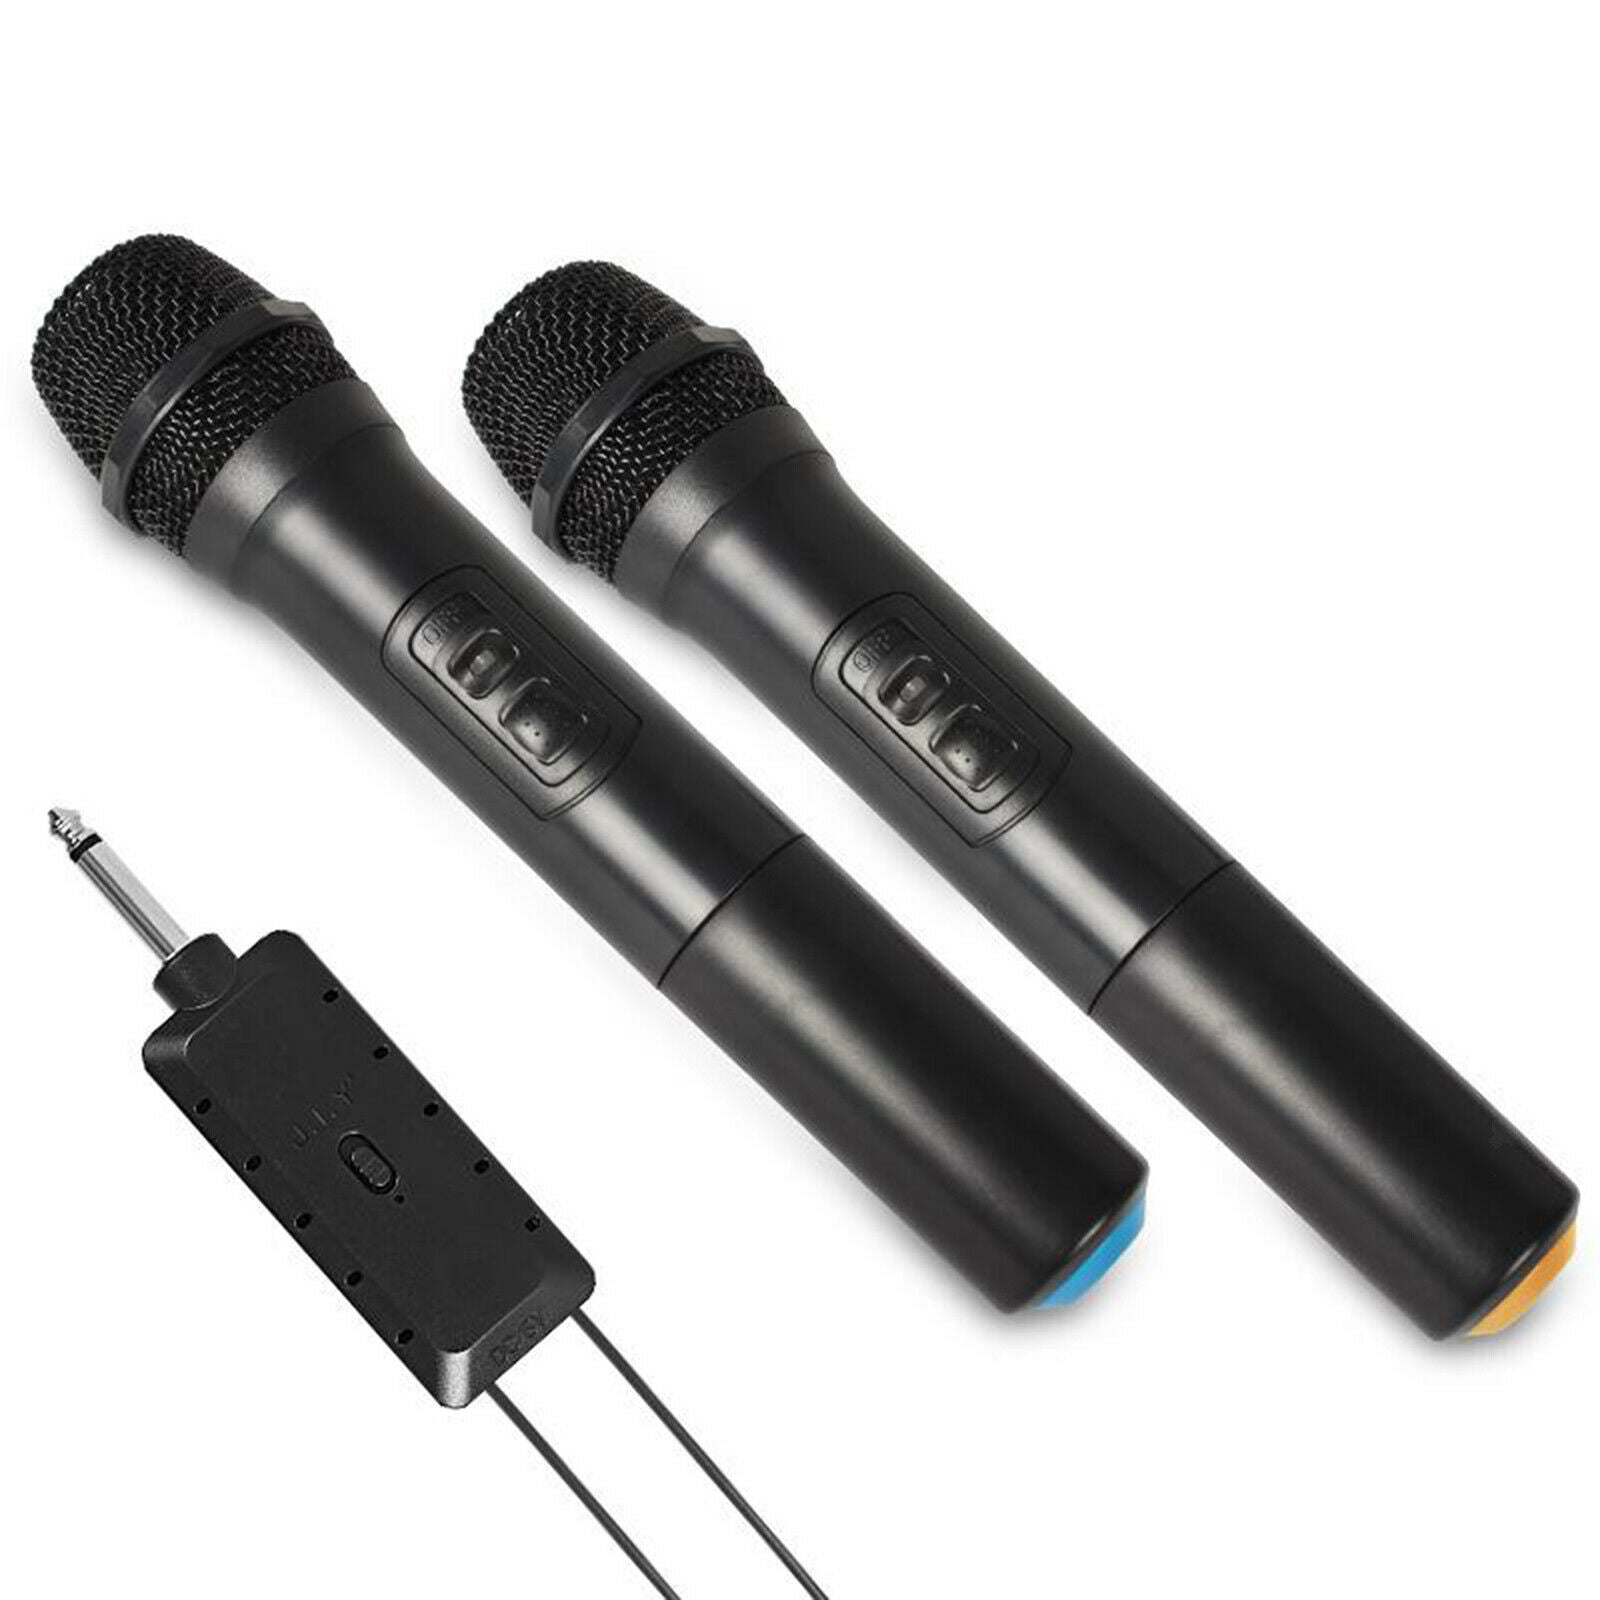 Wireless Microphone Mic System Set with Receiver for Home Karaoke Speech